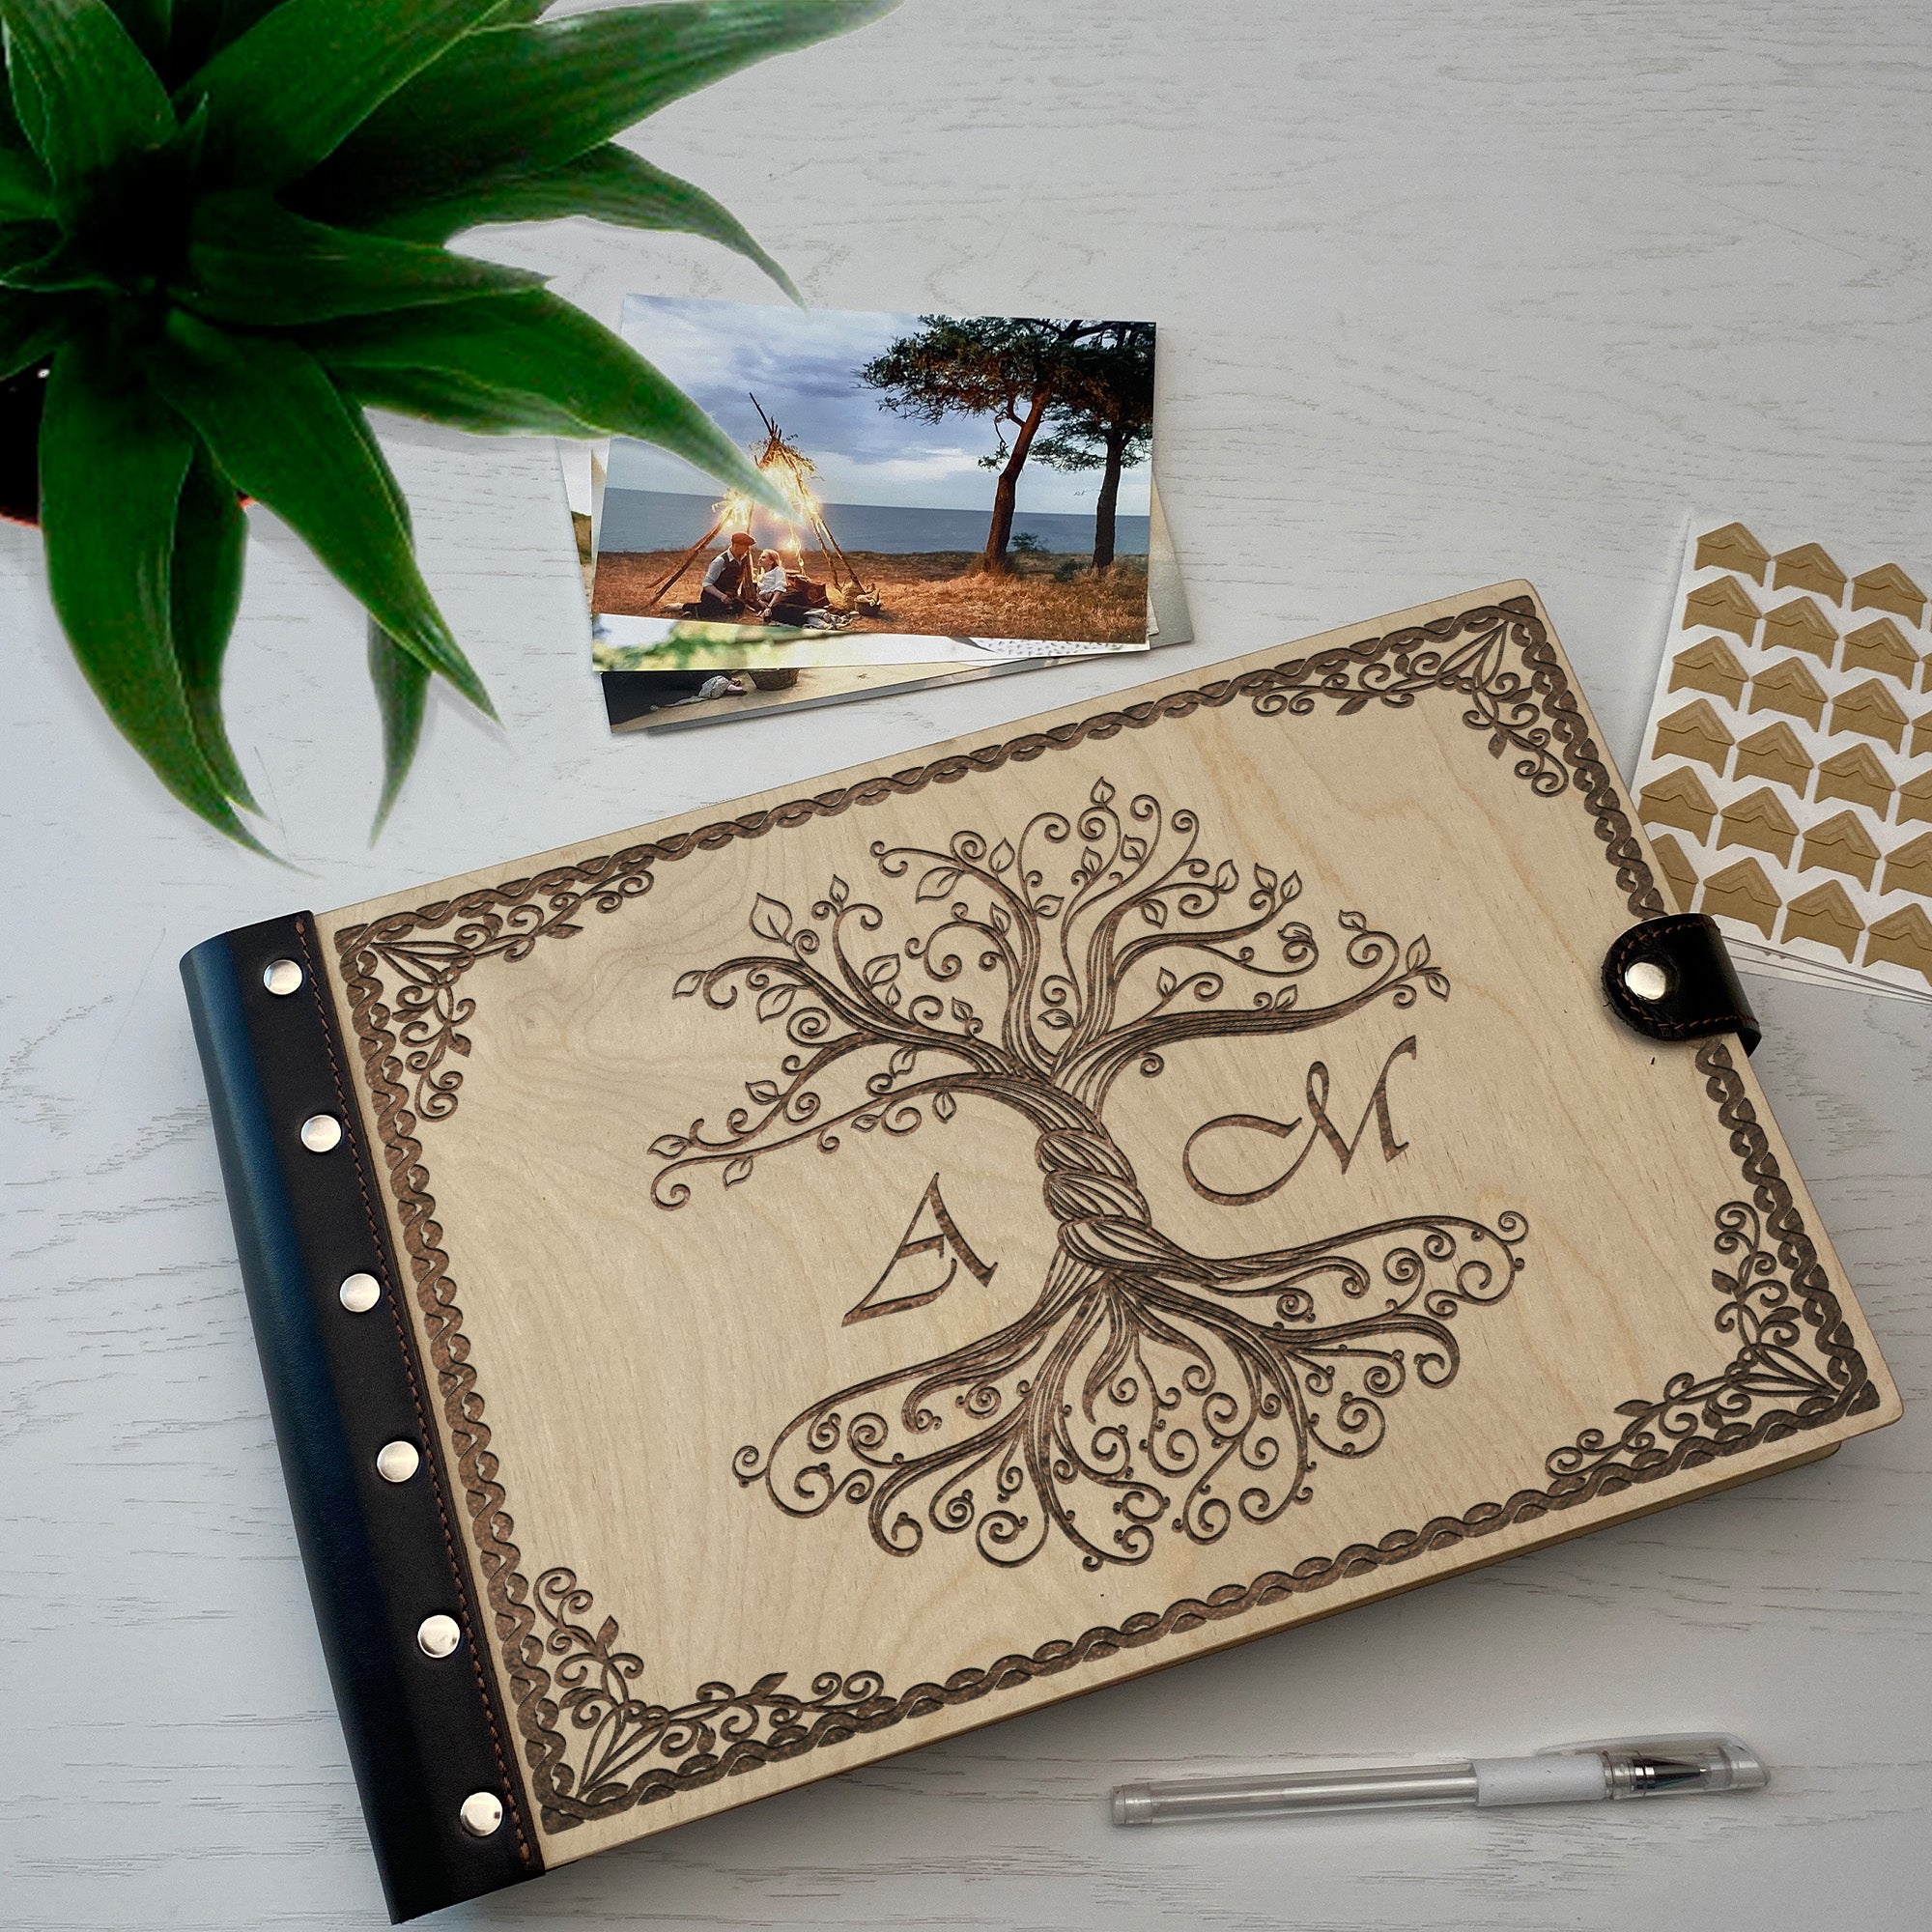 Personalized photo album with leather cover and Wood Life engraving